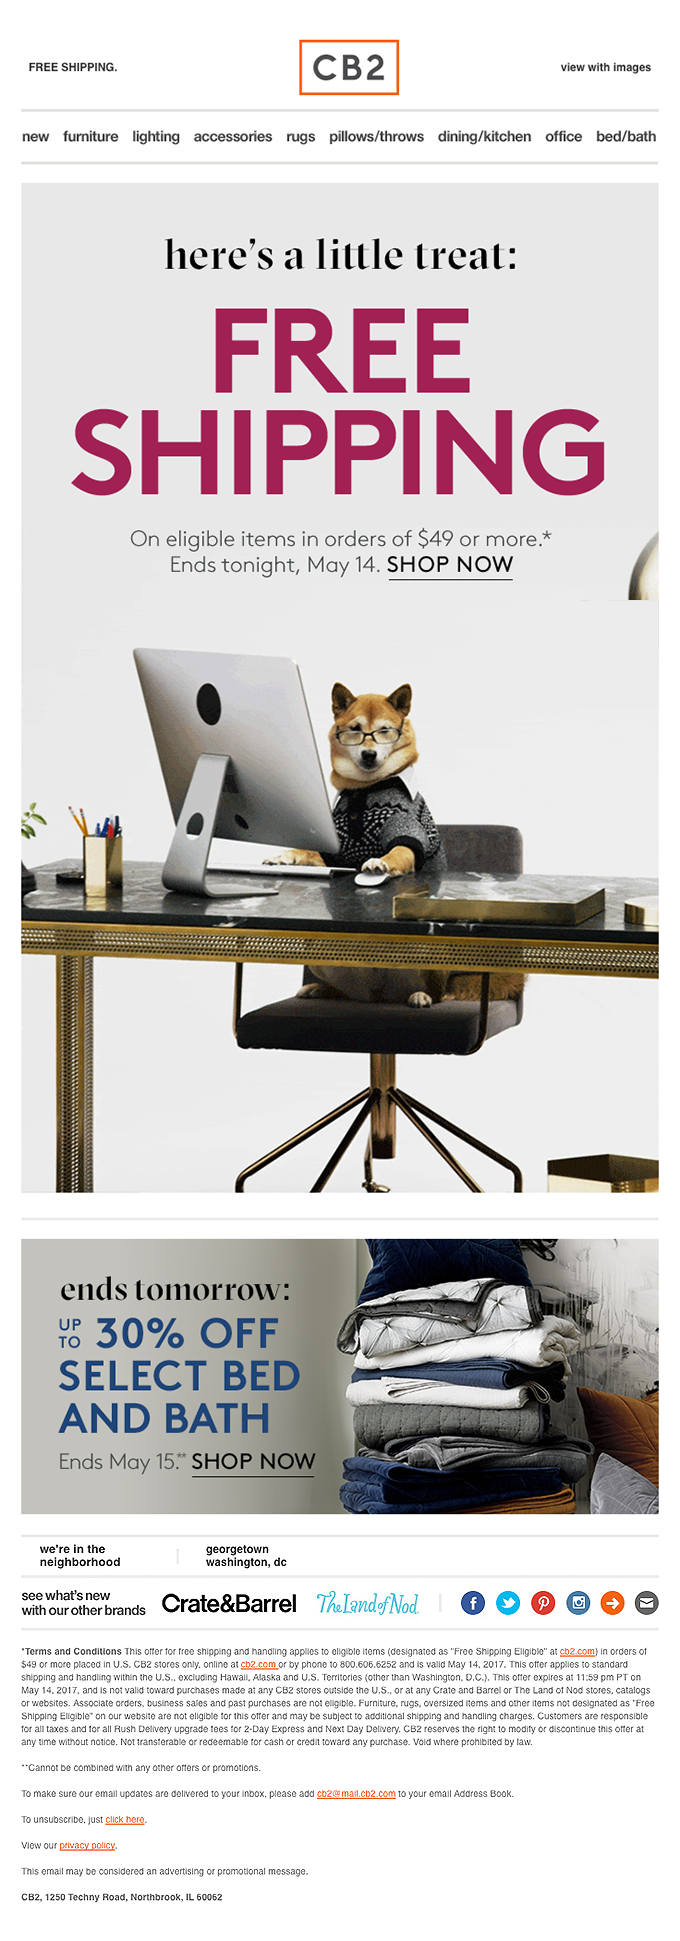 FREE SHIPPING. (PH with bonus dog gif.) from CB2 Desktop Email View